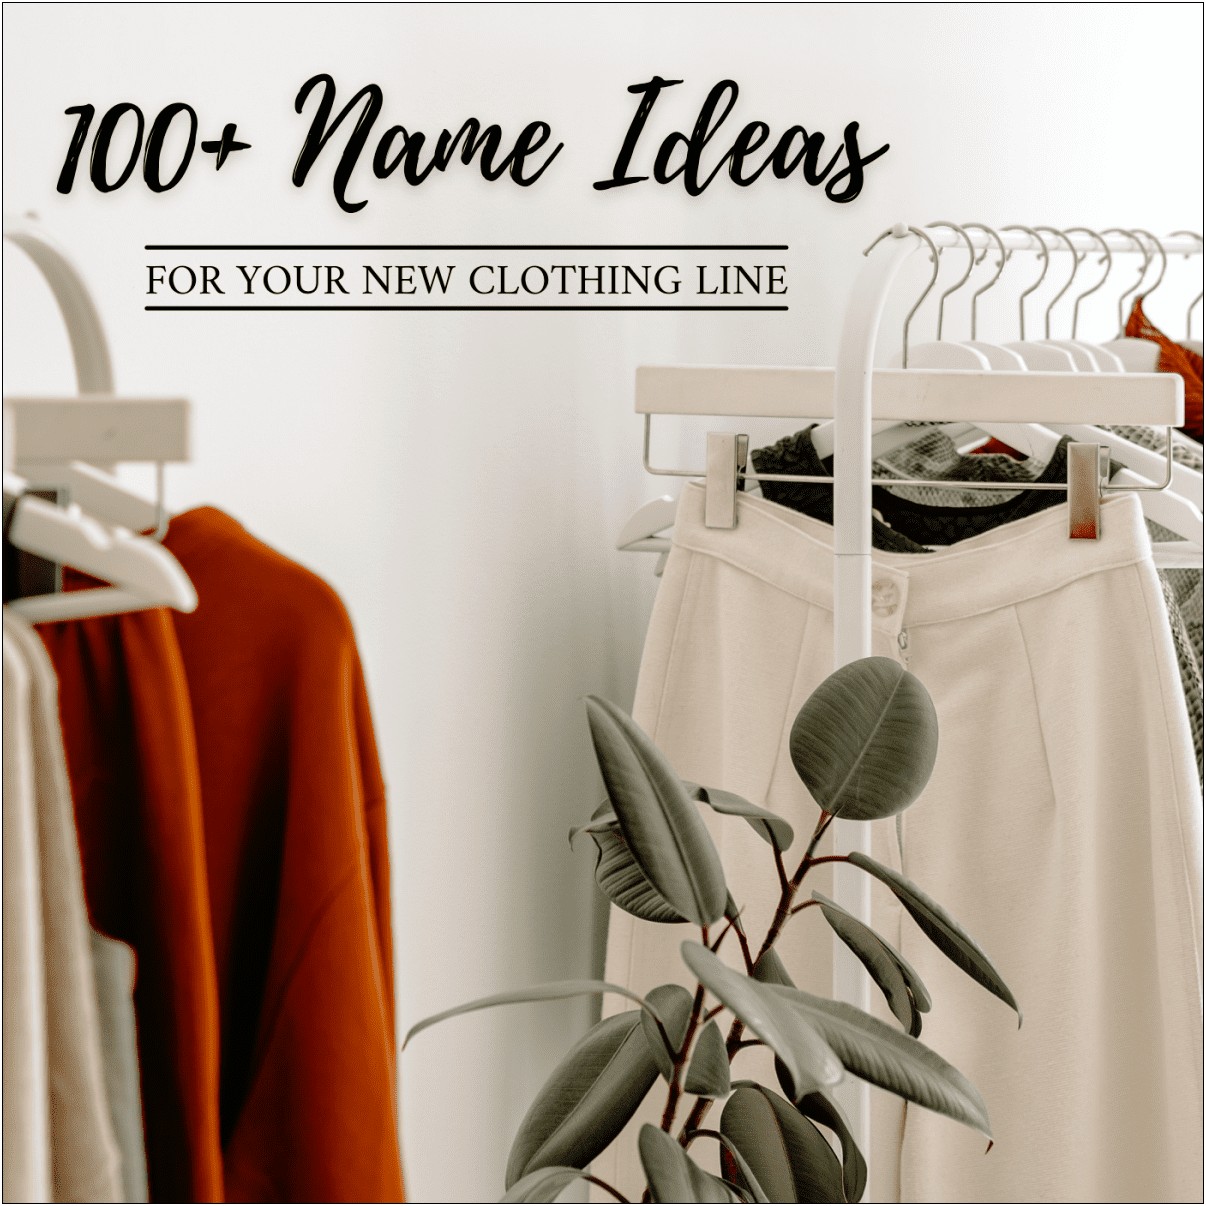 Free Business Plan Template For Urban Clothing Line